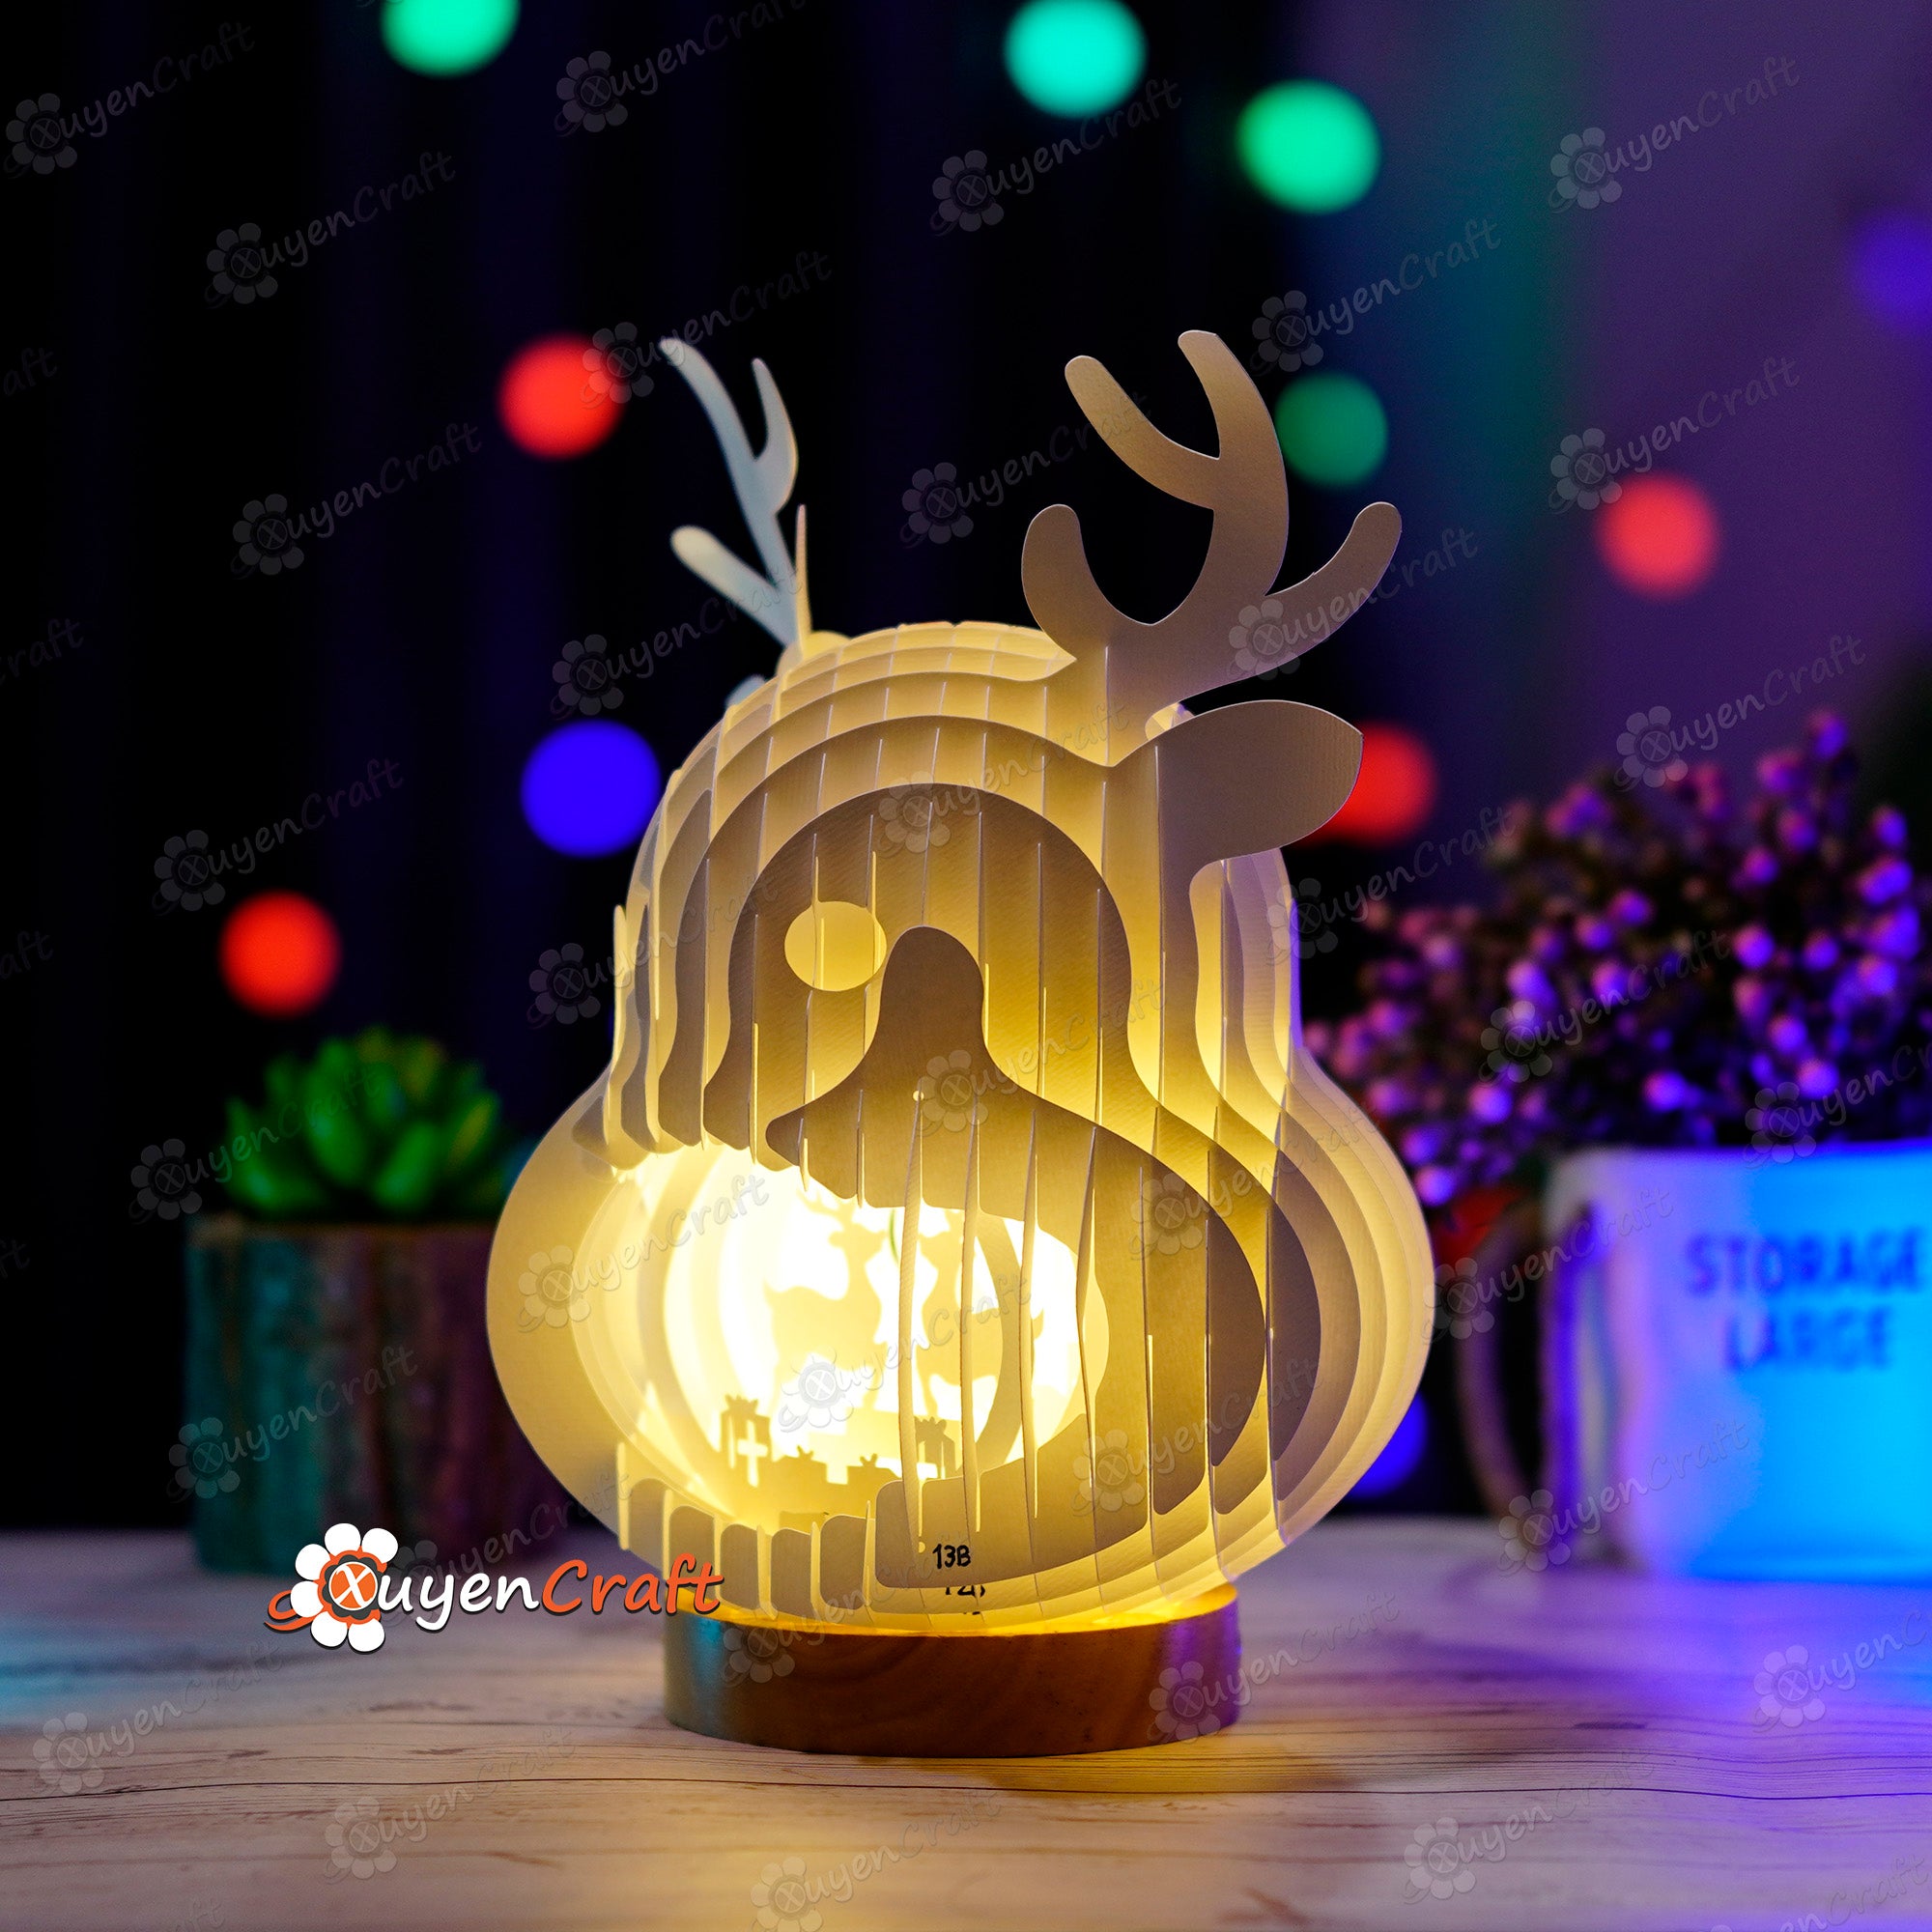 Merry Christmas Reindeer Pop Up SVG Template for Cricut Projects - 3D Reindeer Slice Form Popup for Merry Christmas